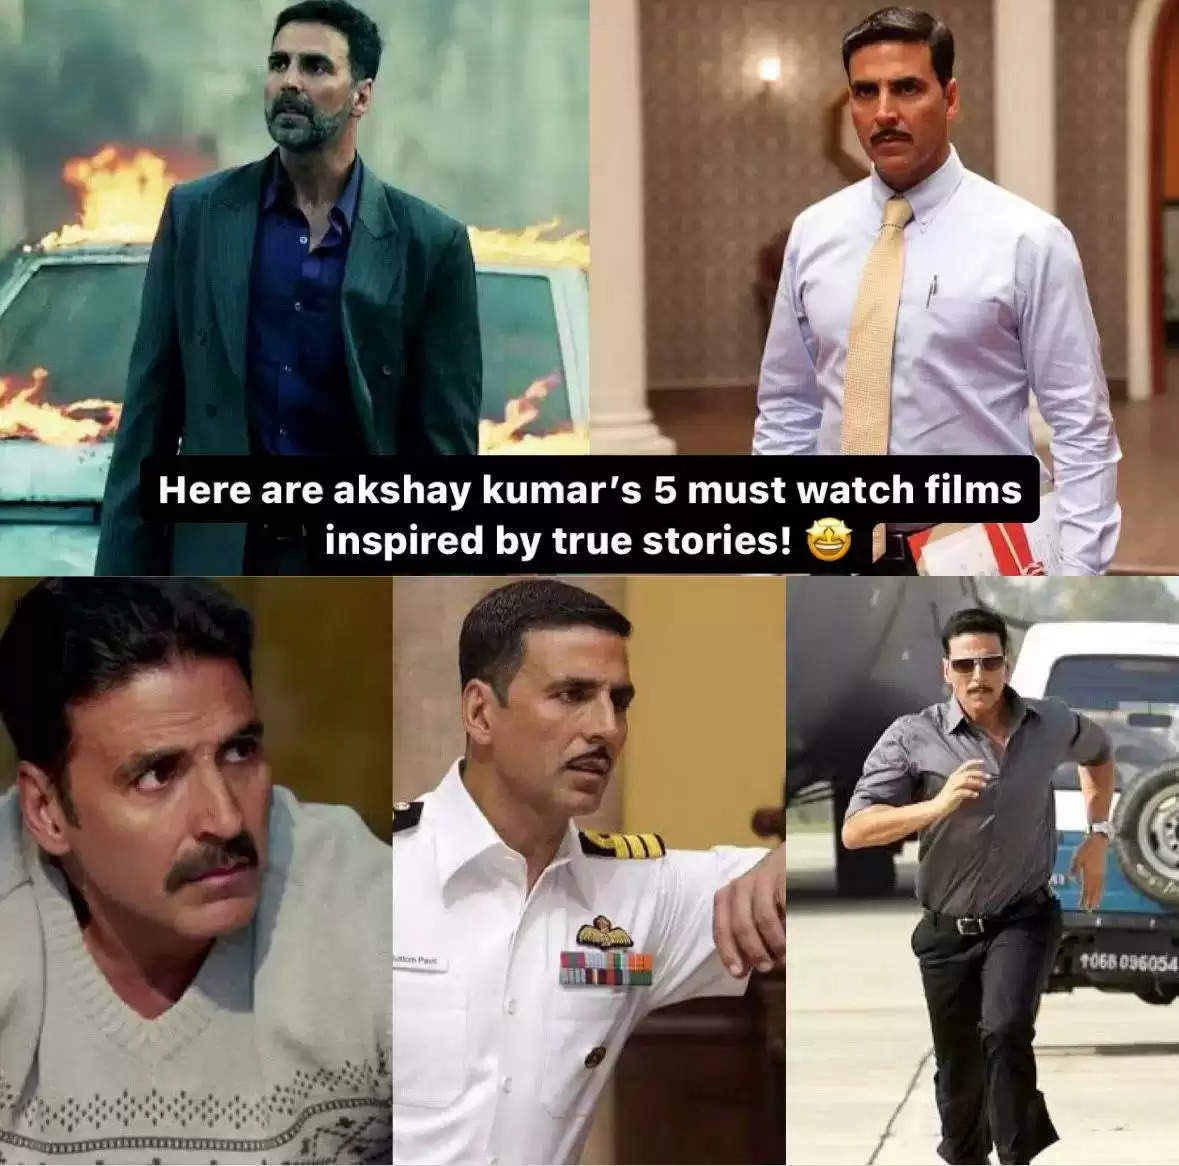 Here are Akshay Kumar 5 must watch films inspired by true stories!